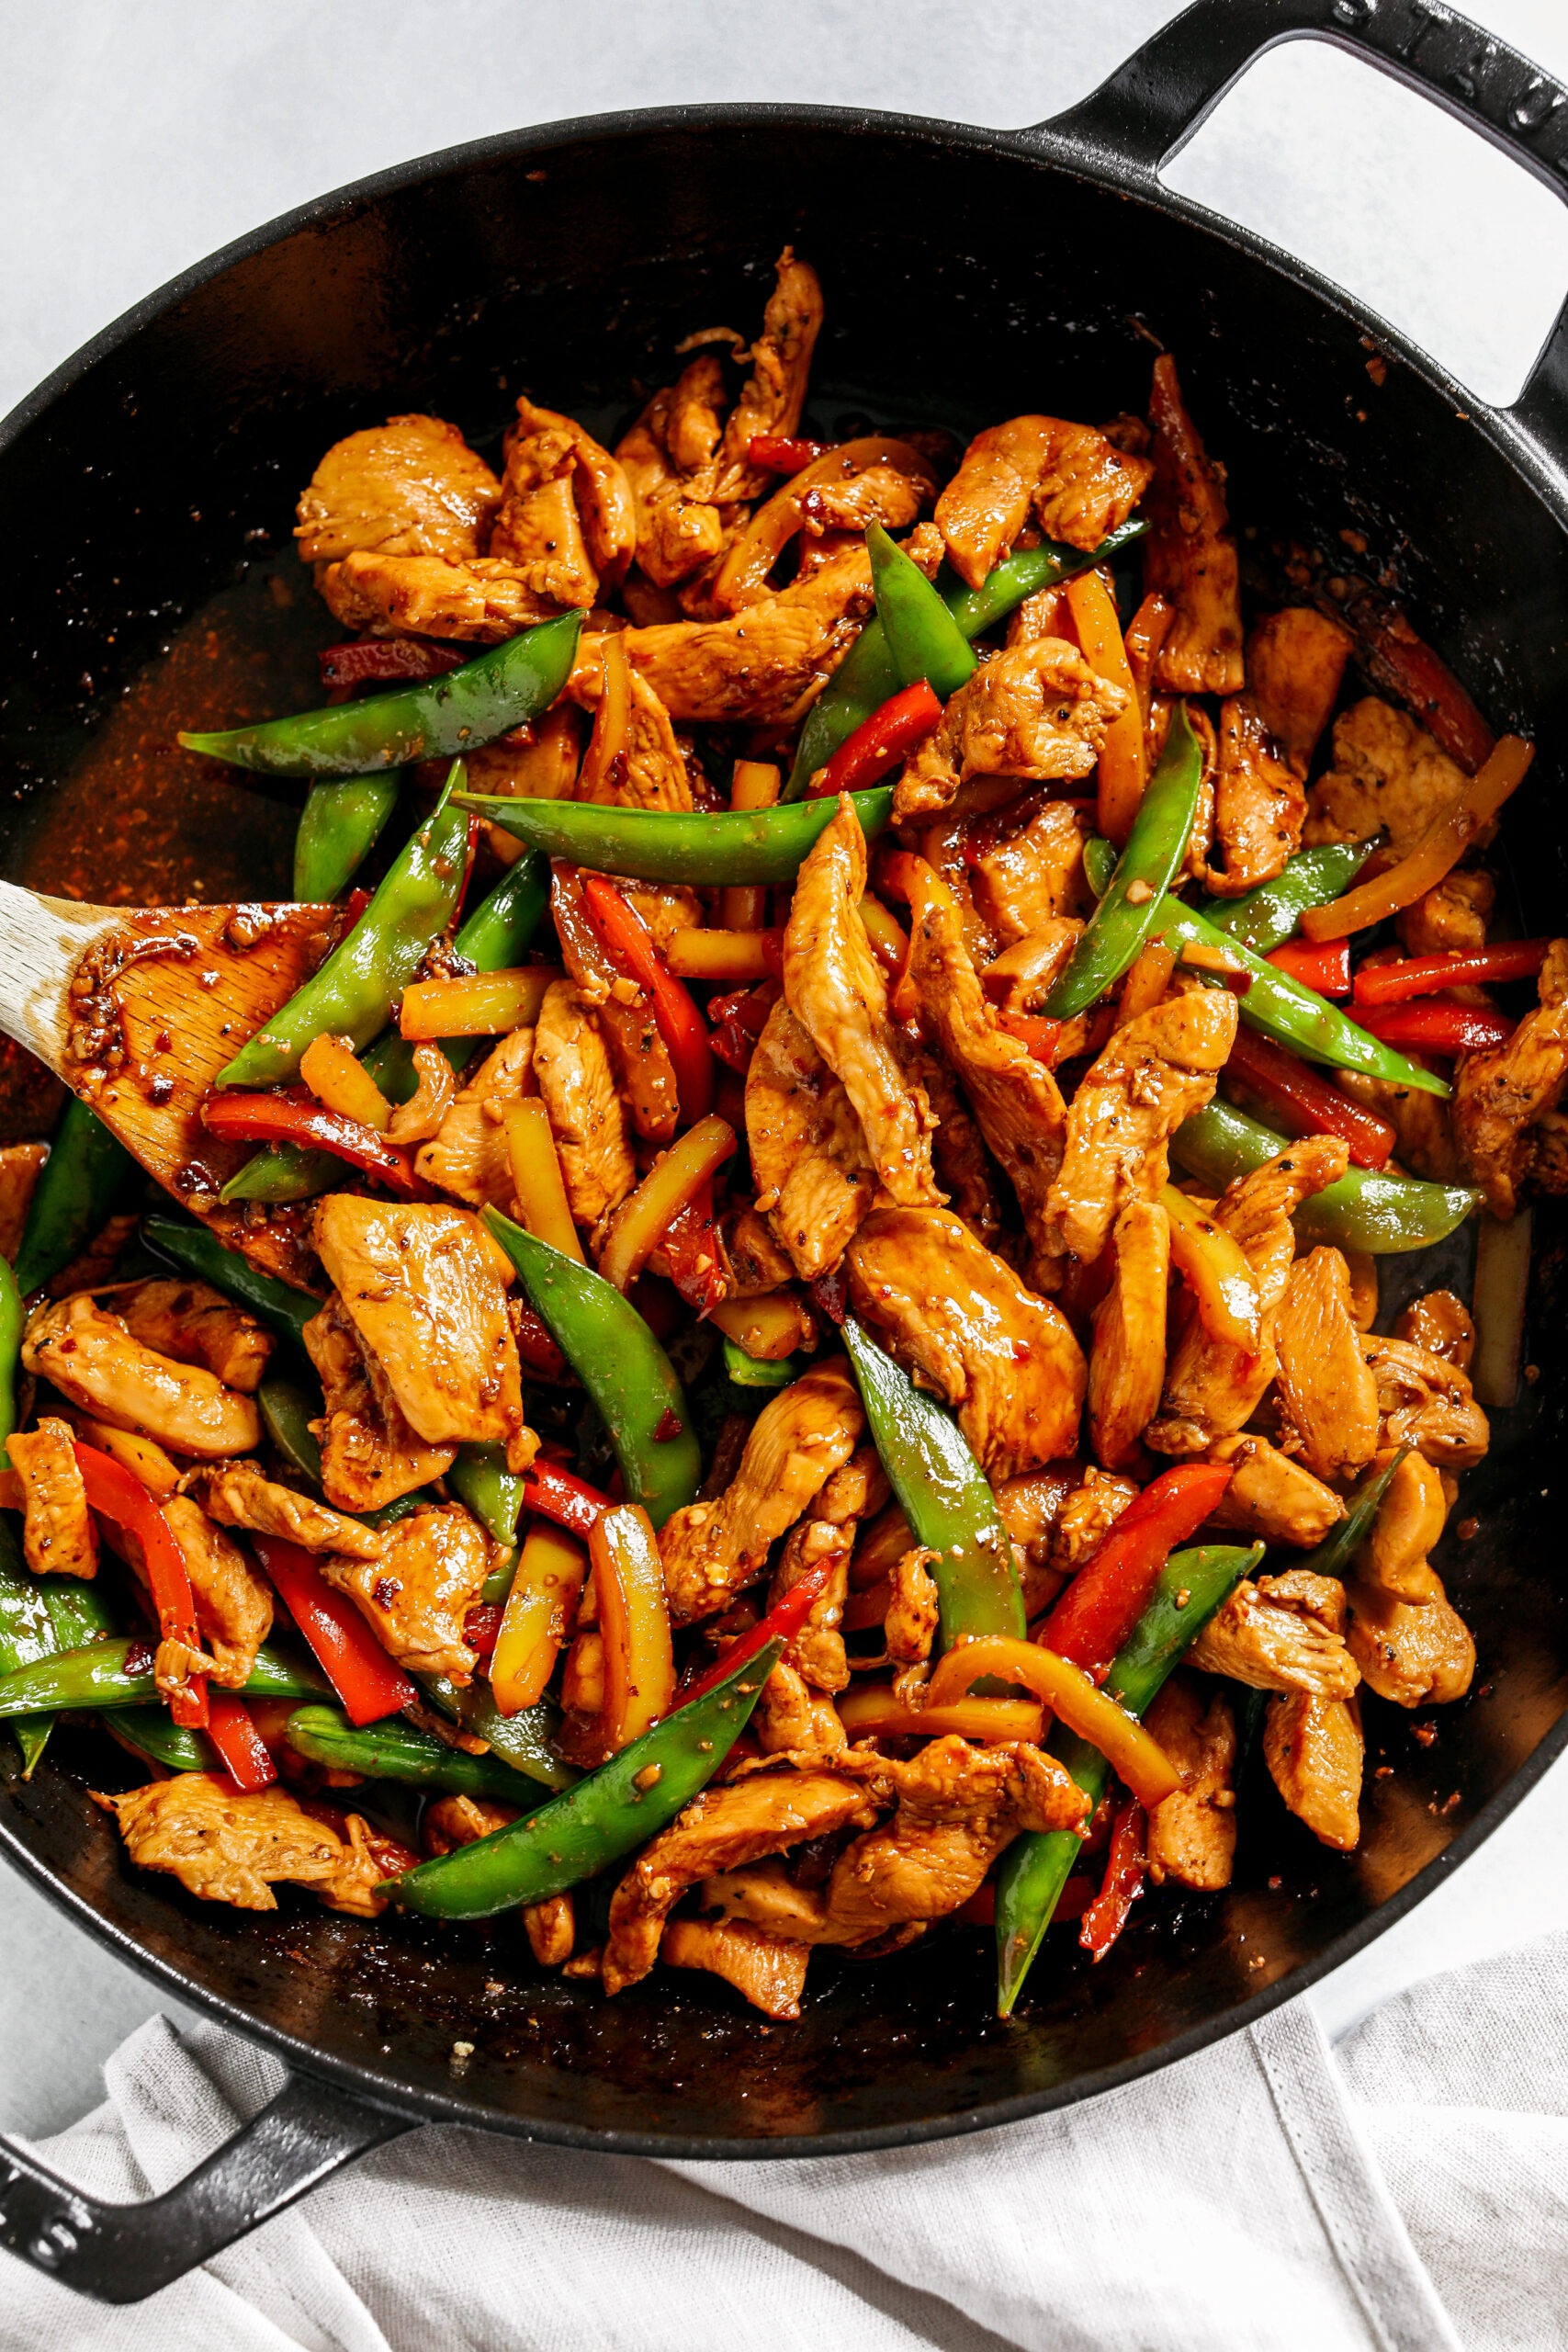 This sweet and spicy Firecracker Chicken Stir Fry is the perfect weeknight meal with tender, juicy chicken, crisp vegetables, all smothered in a delicious sauce that tastes way better than take-out!  Serve over rice and have dinner on your table in under 30 minutes! 